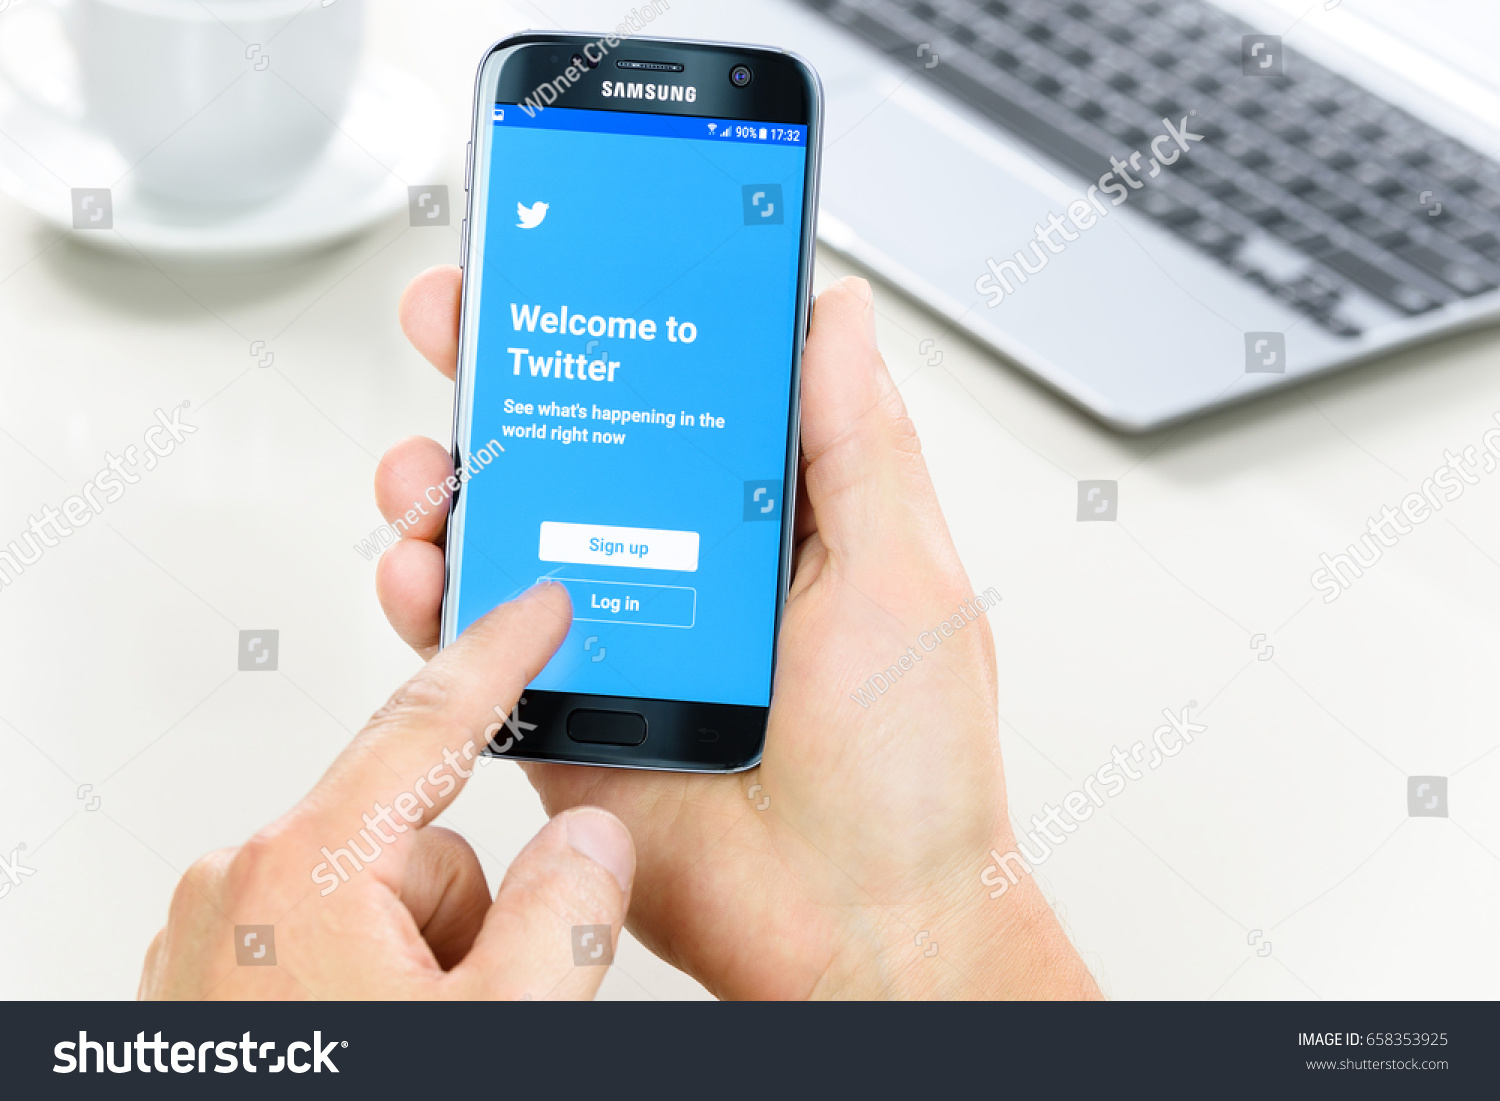 Krynica Poland - June 10, 2017: Samsung Galaxy S7 in the hand when logging into Twitter applications. Twitter is one of the most popular social networking service in the world. #658353925